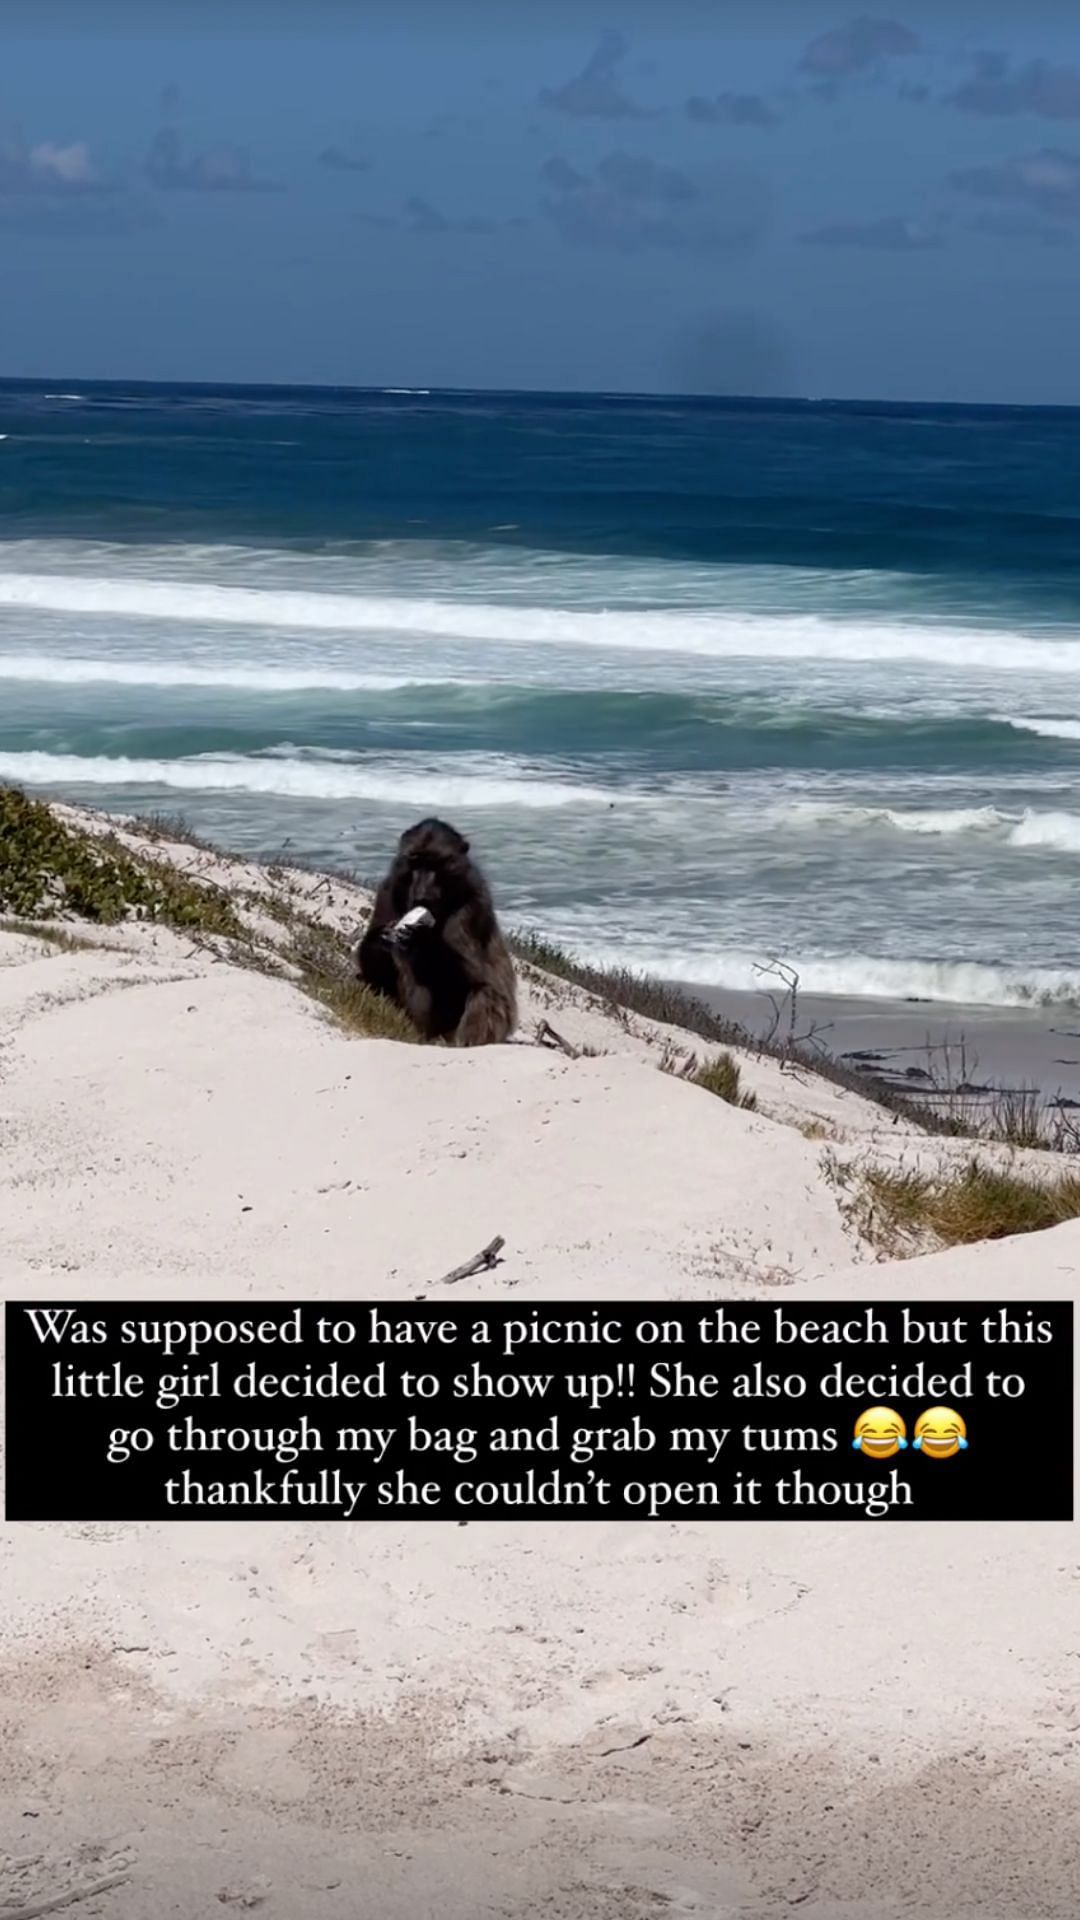 A picture of a monkey on the beach